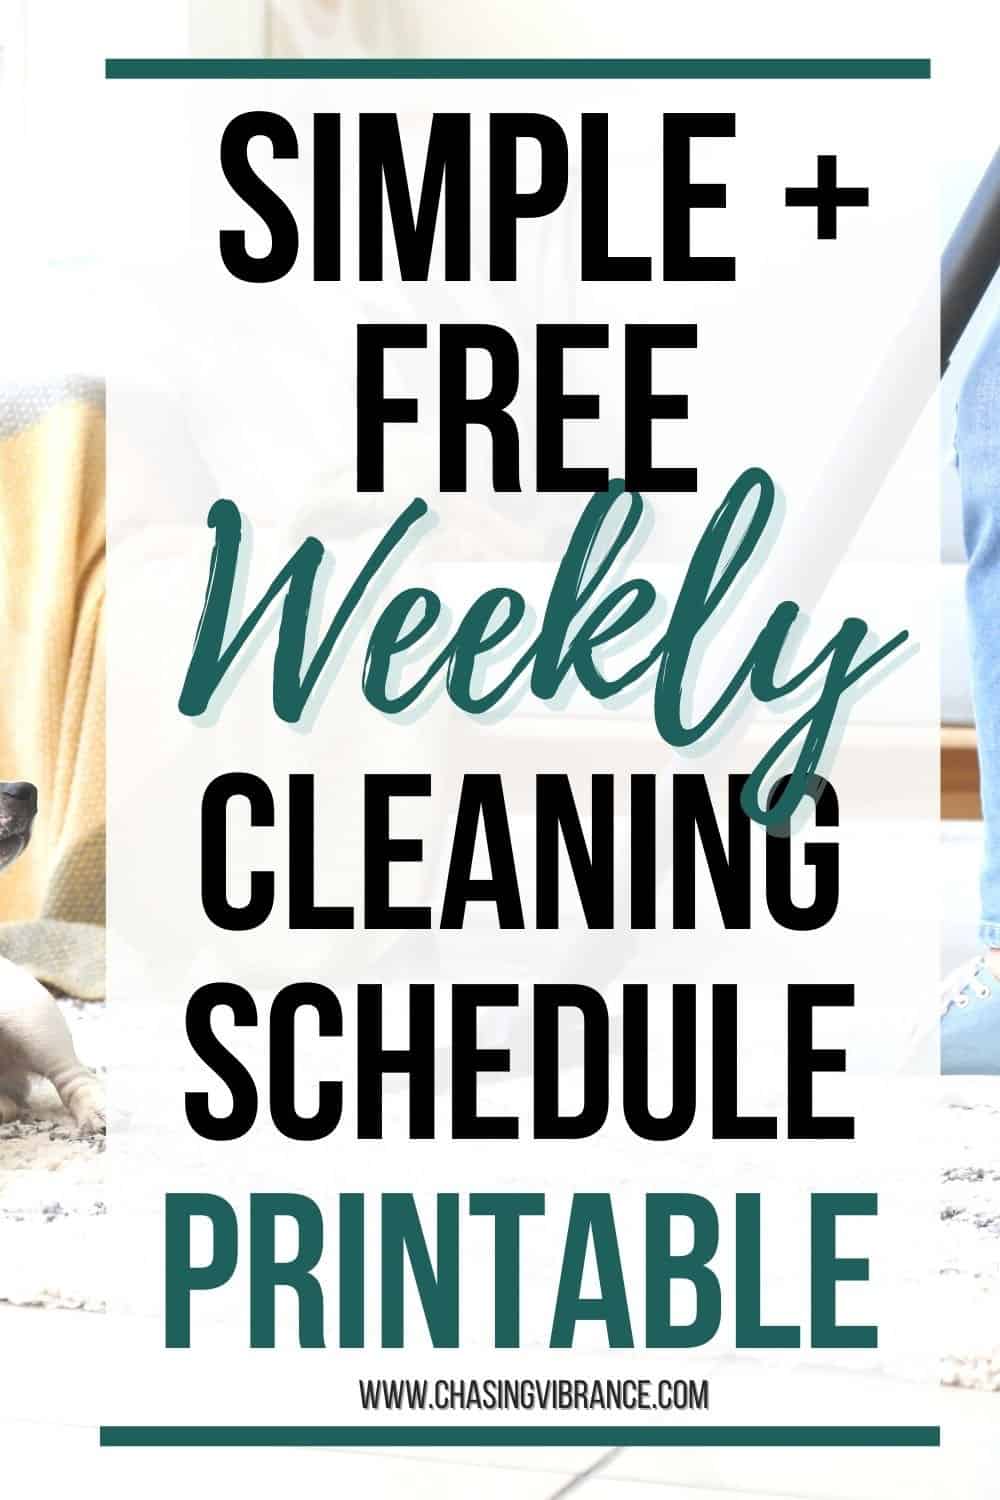 woman vacuums light and bright living room with large text overlay "simple + free weekly cleaning schedule printable"